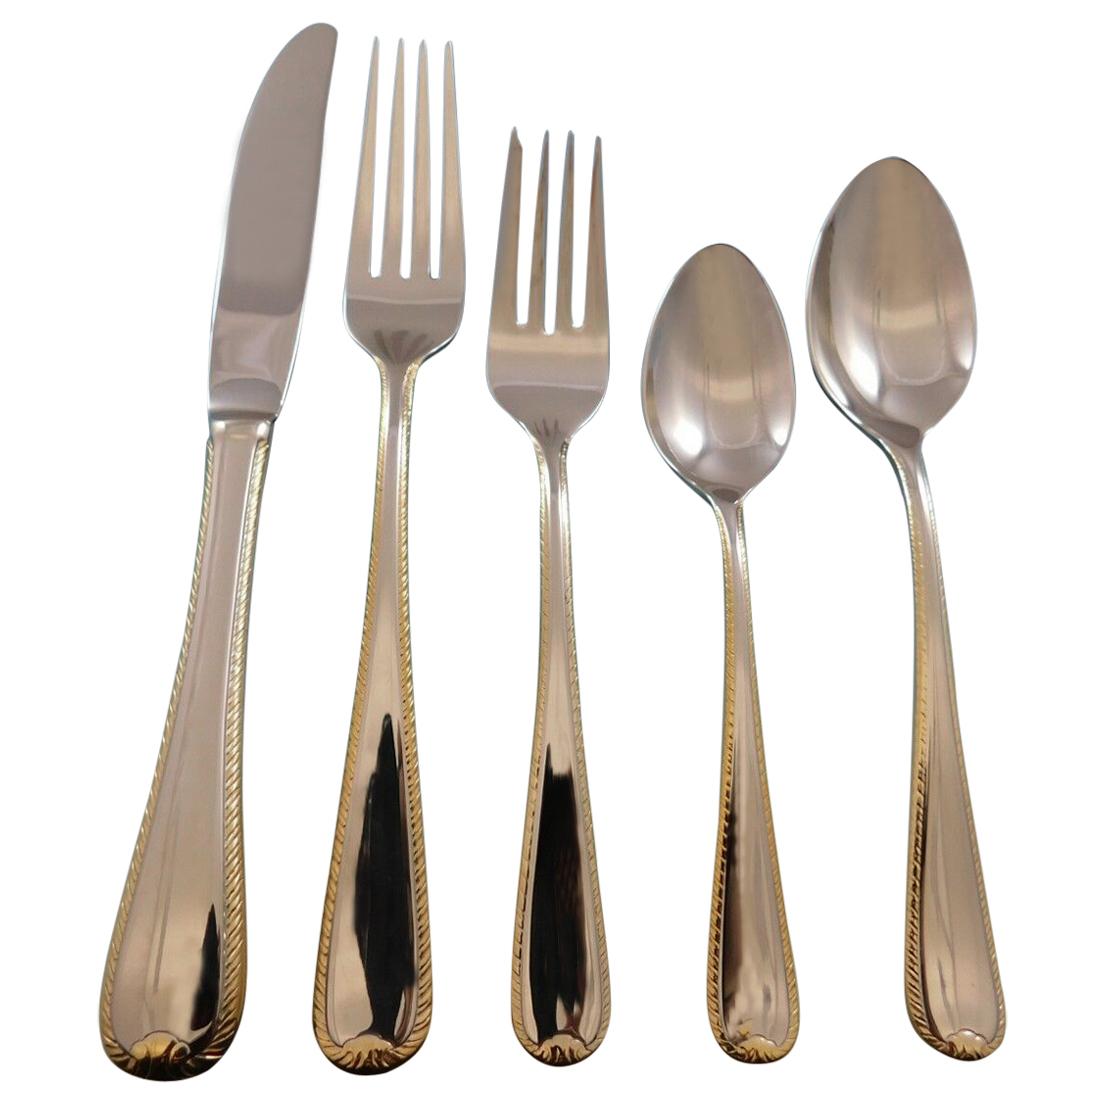 Golden Ribbon Edge by Gorham Stainless Steel Flatware Set Service for 8 New 40pc